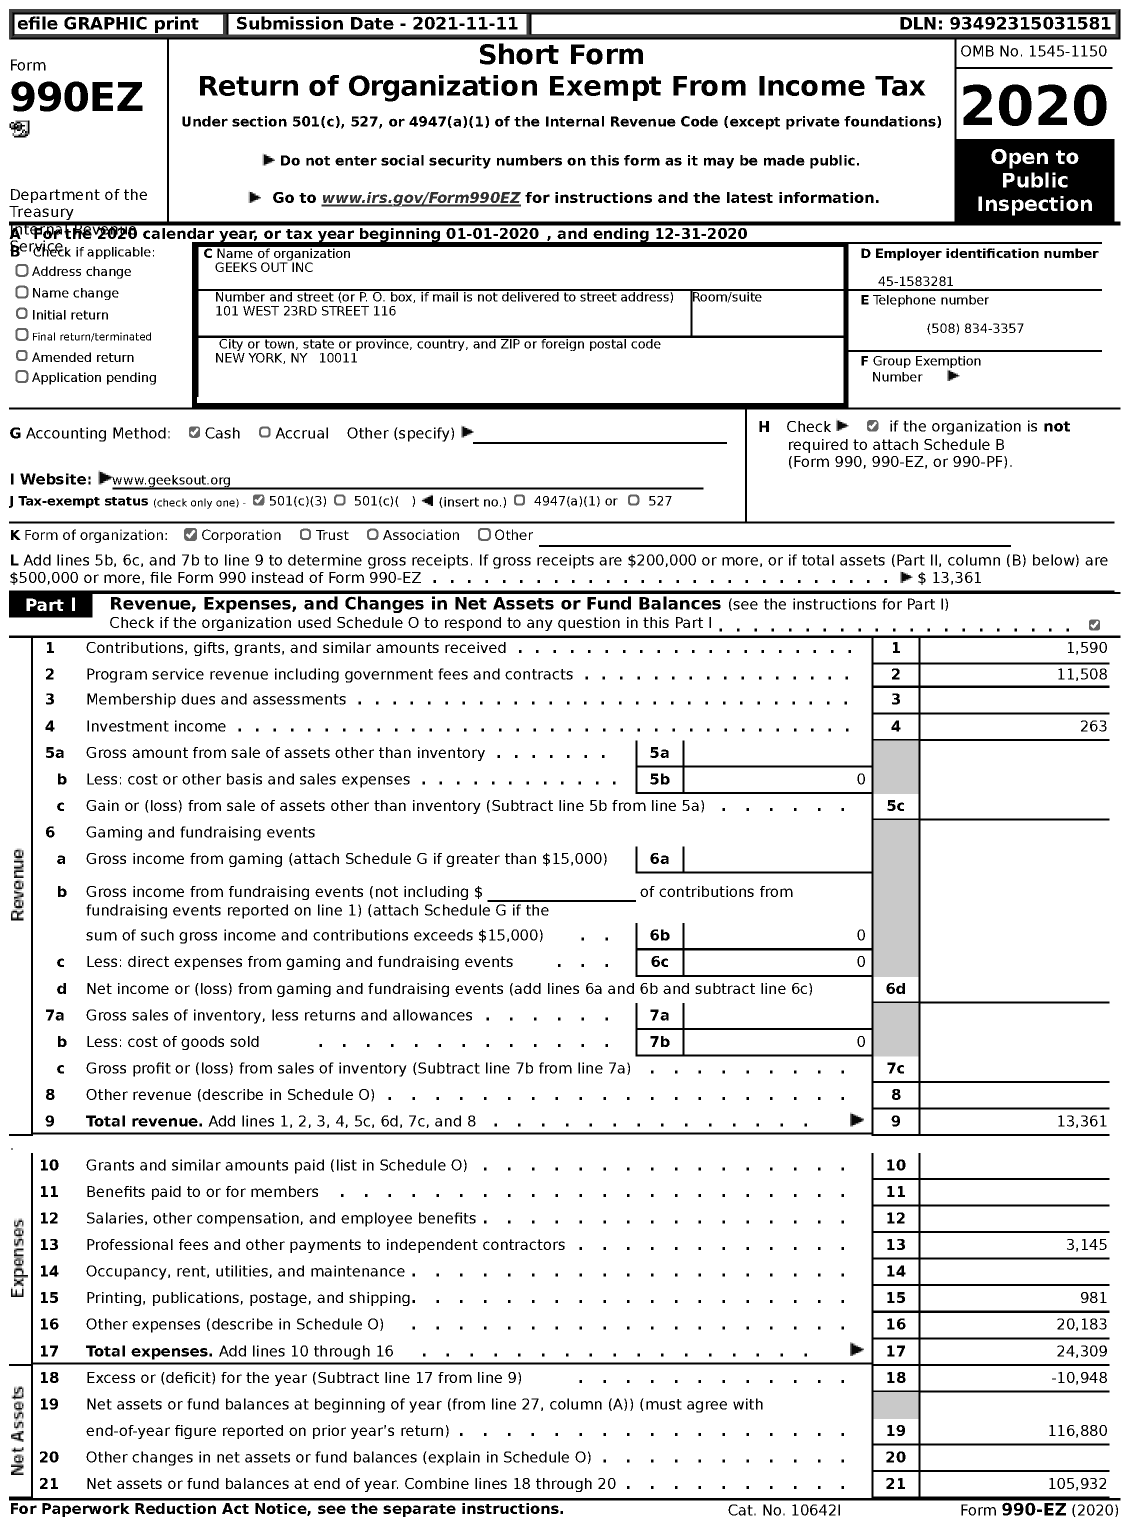 Image of first page of 2020 Form 990EZ for Geeks Out